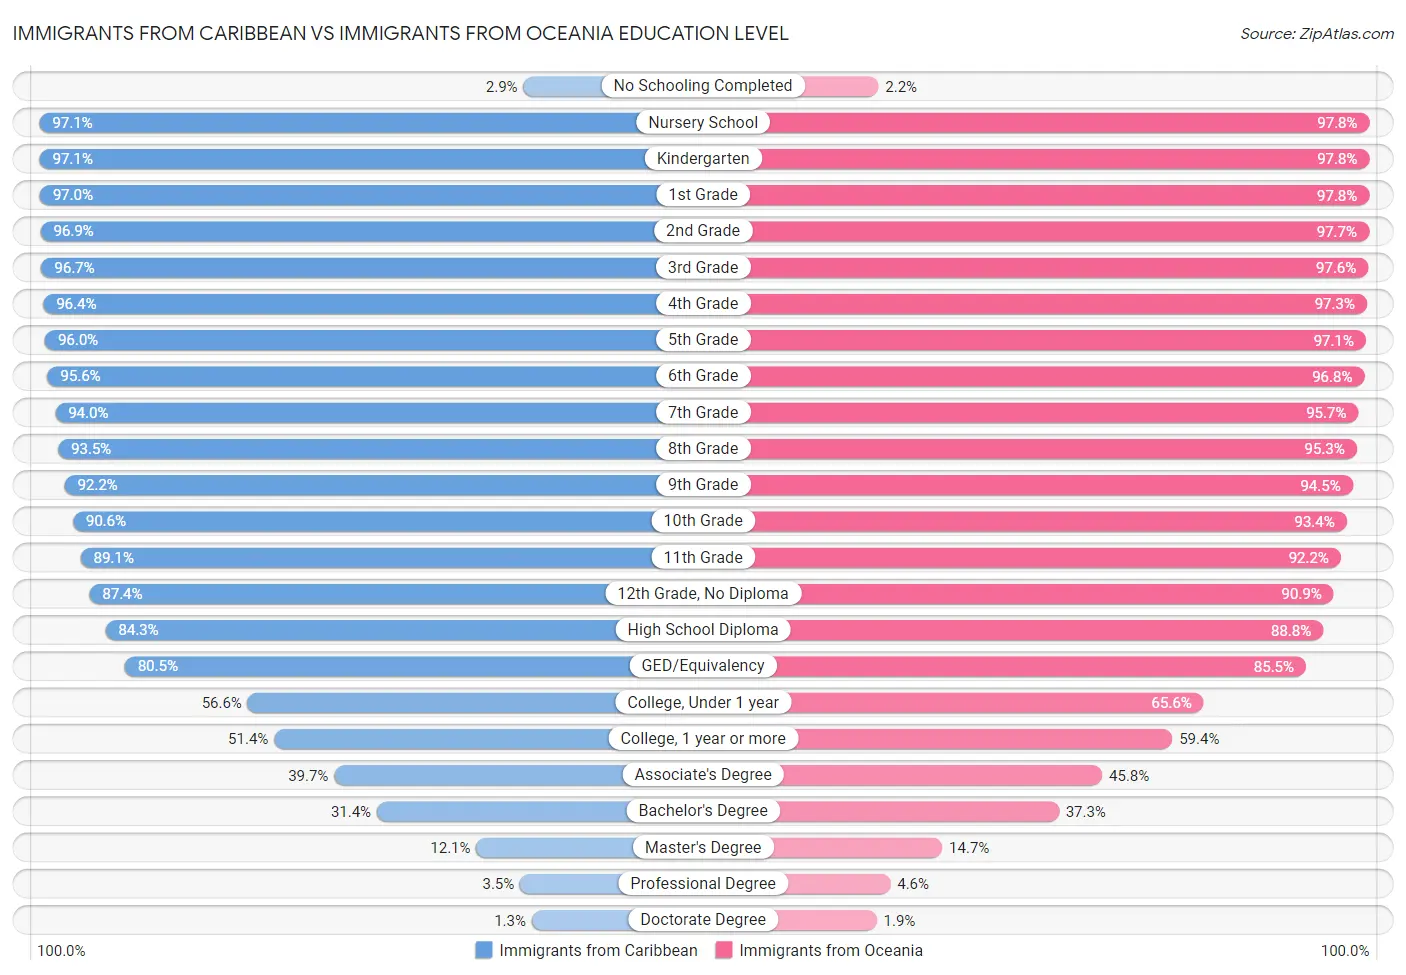 Immigrants from Caribbean vs Immigrants from Oceania Education Level